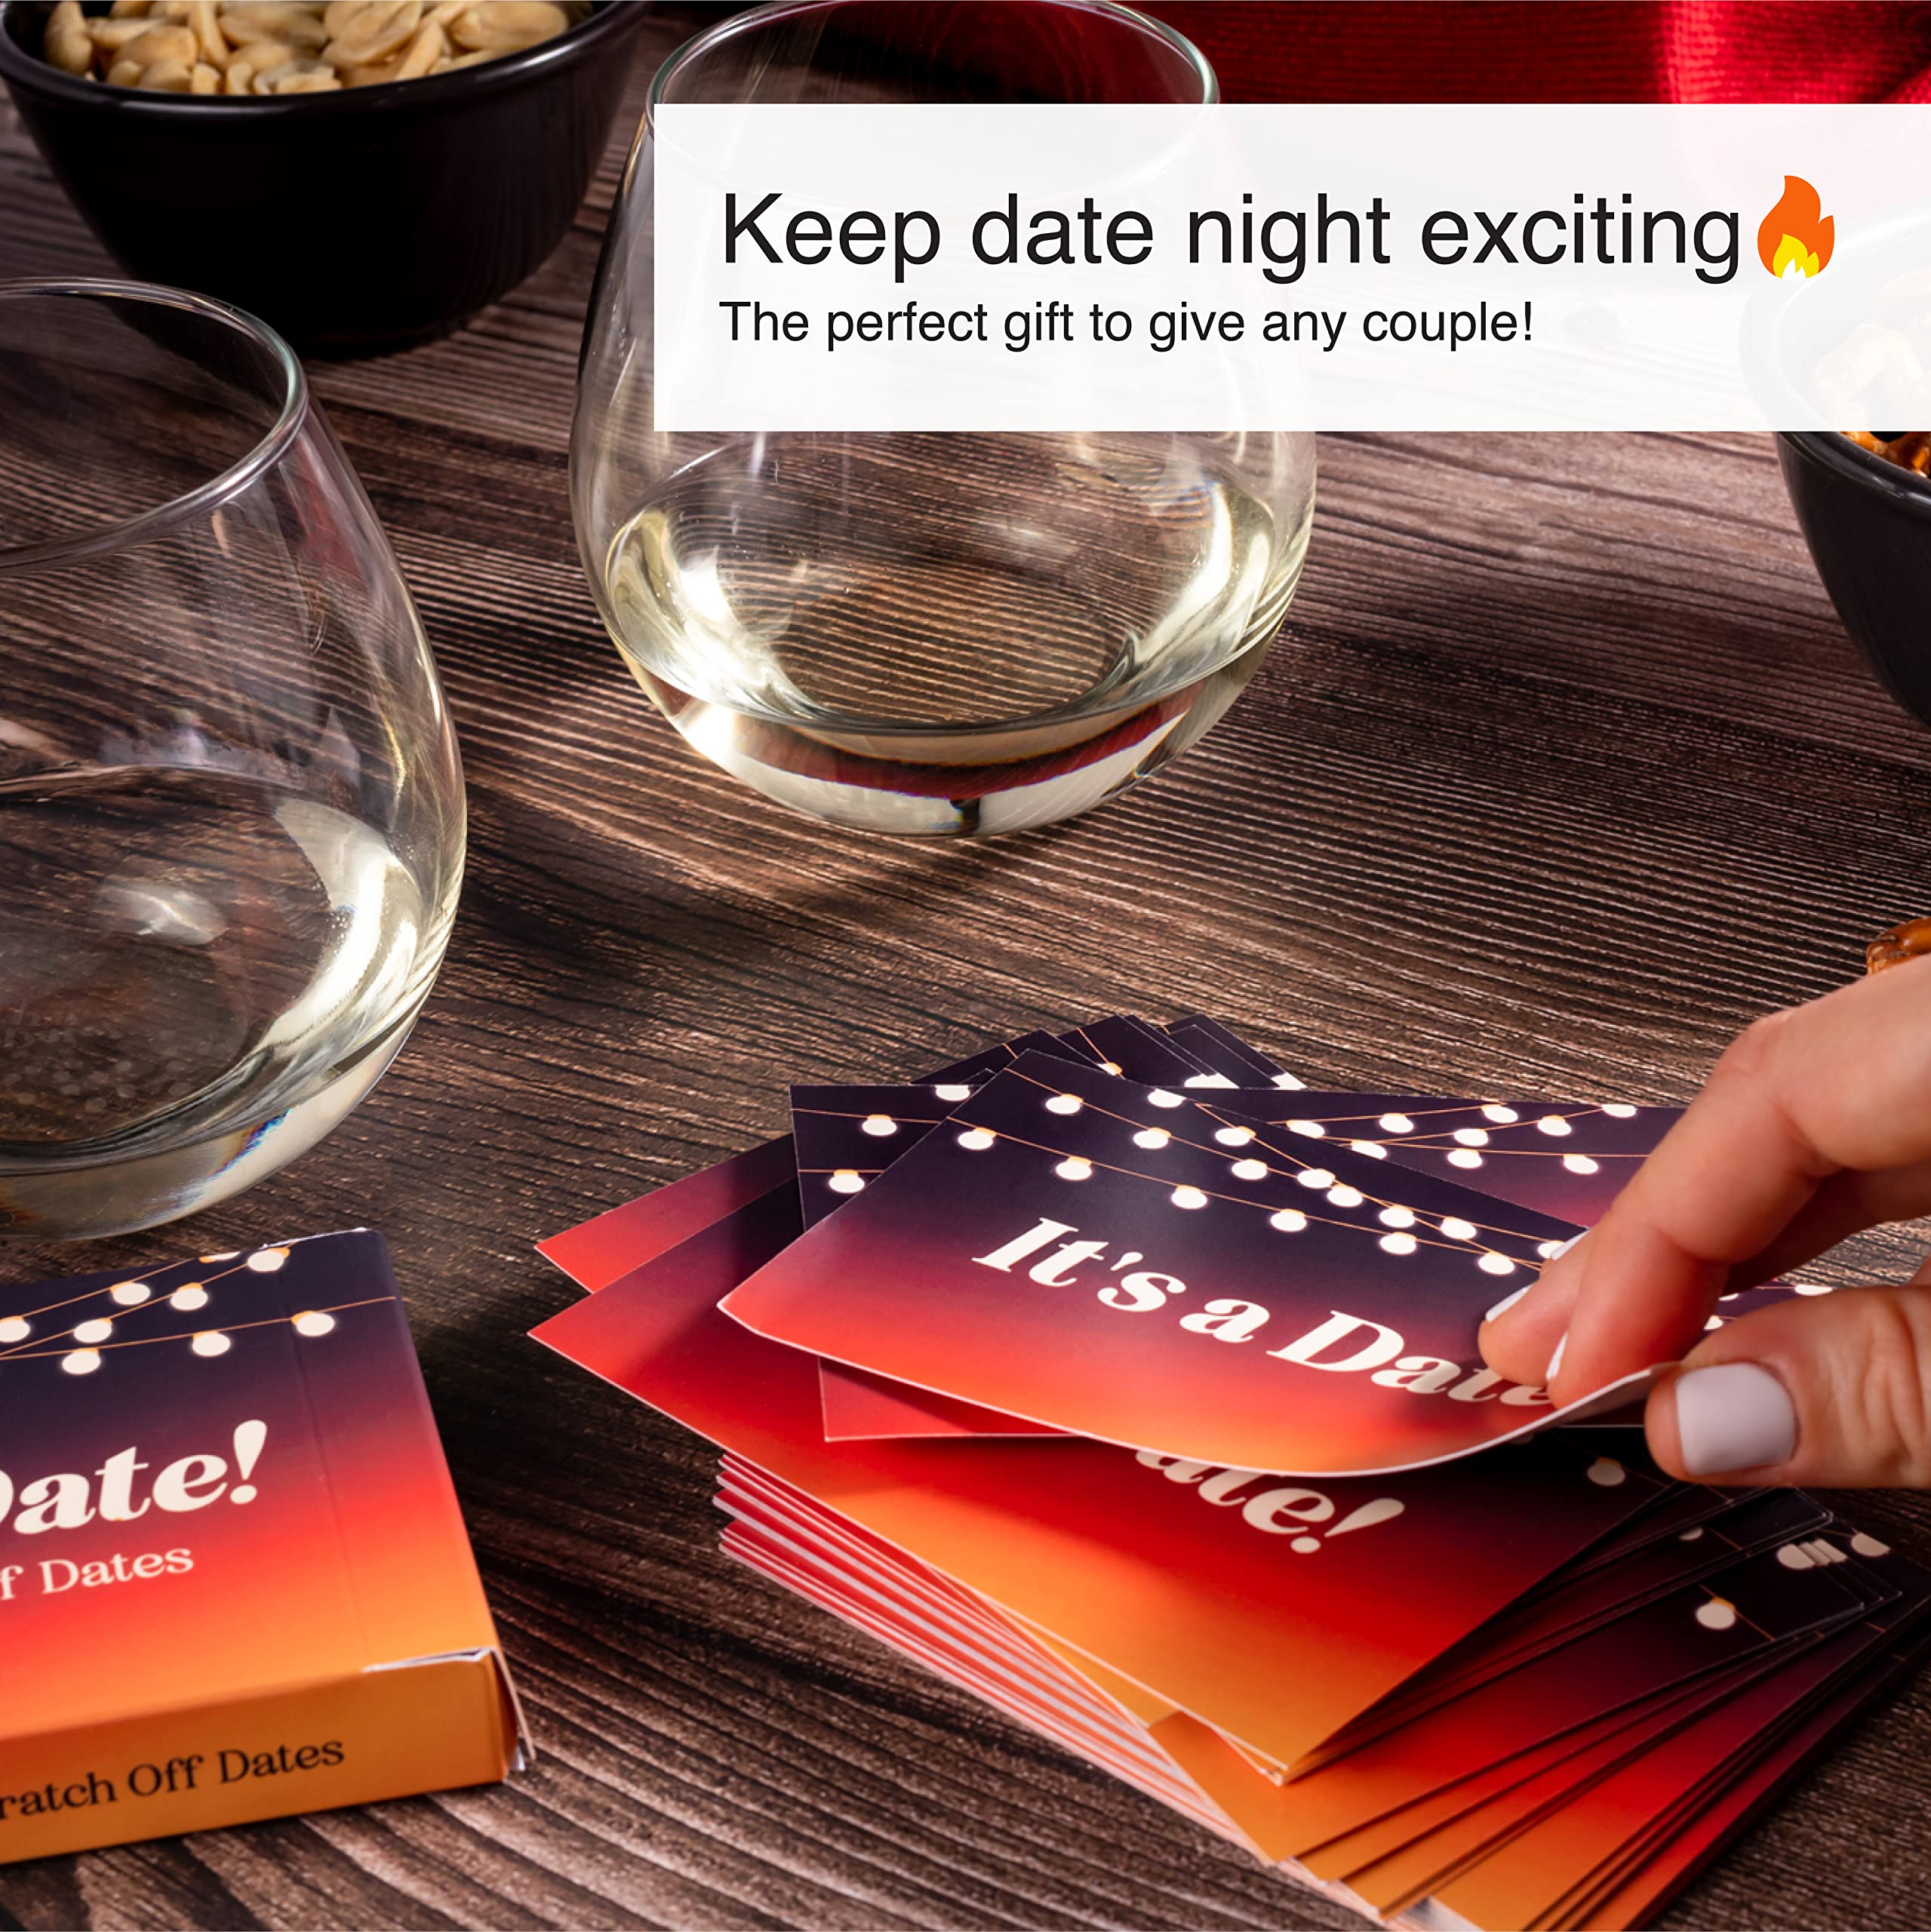 It's a Date!™ - 40 Fun and Romantic Scratch Off Date Night Ideas for Him, Her, Girlfriend, Boyfriend, Wife, Husband for Date Night, Weddings, Anniversaries, and Birthdays! (3.5” x 4.5”)